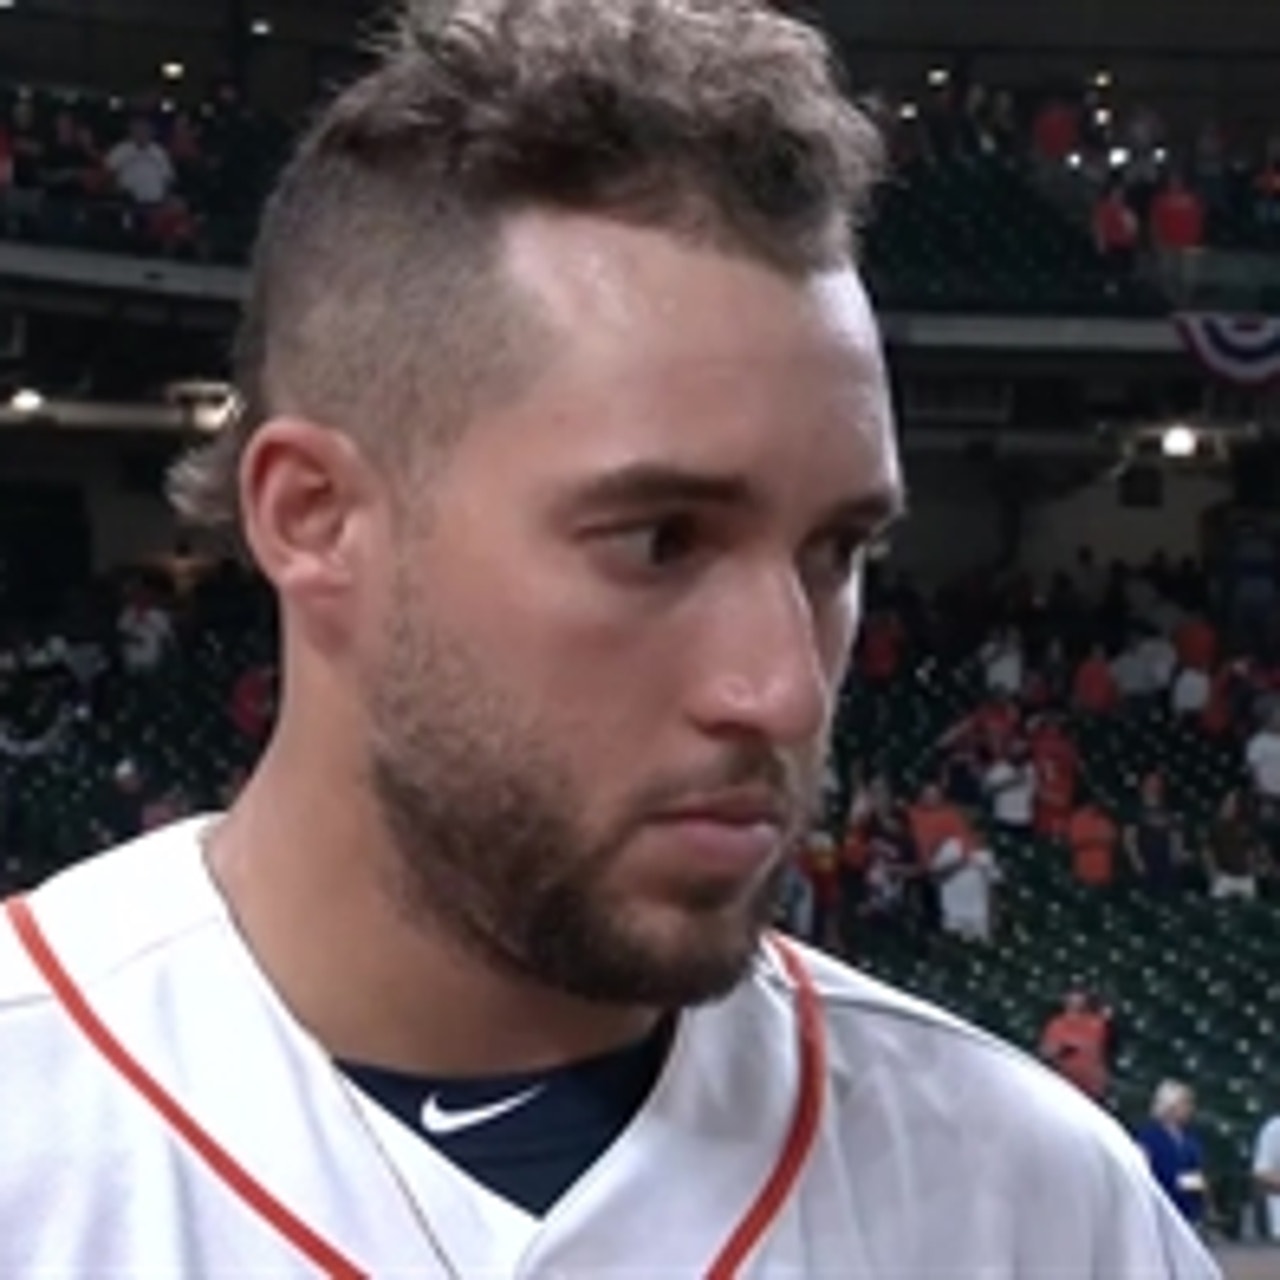 George Springer on his tying home run and the job of the Astros